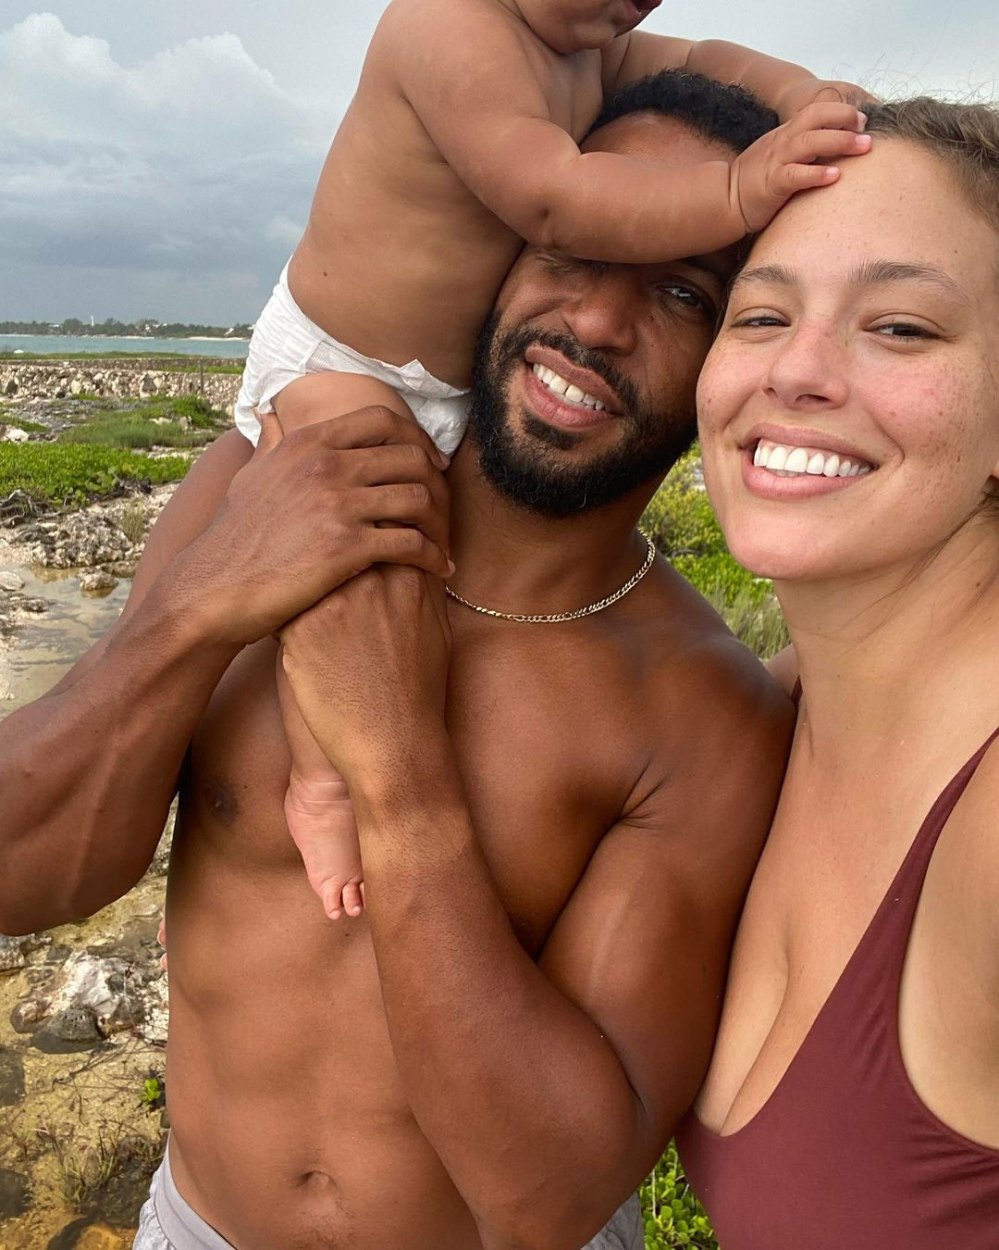 Ashley Graham Is Ready for 2nd Baby With Justin Ervin 1 Year After Son Isaac Birth